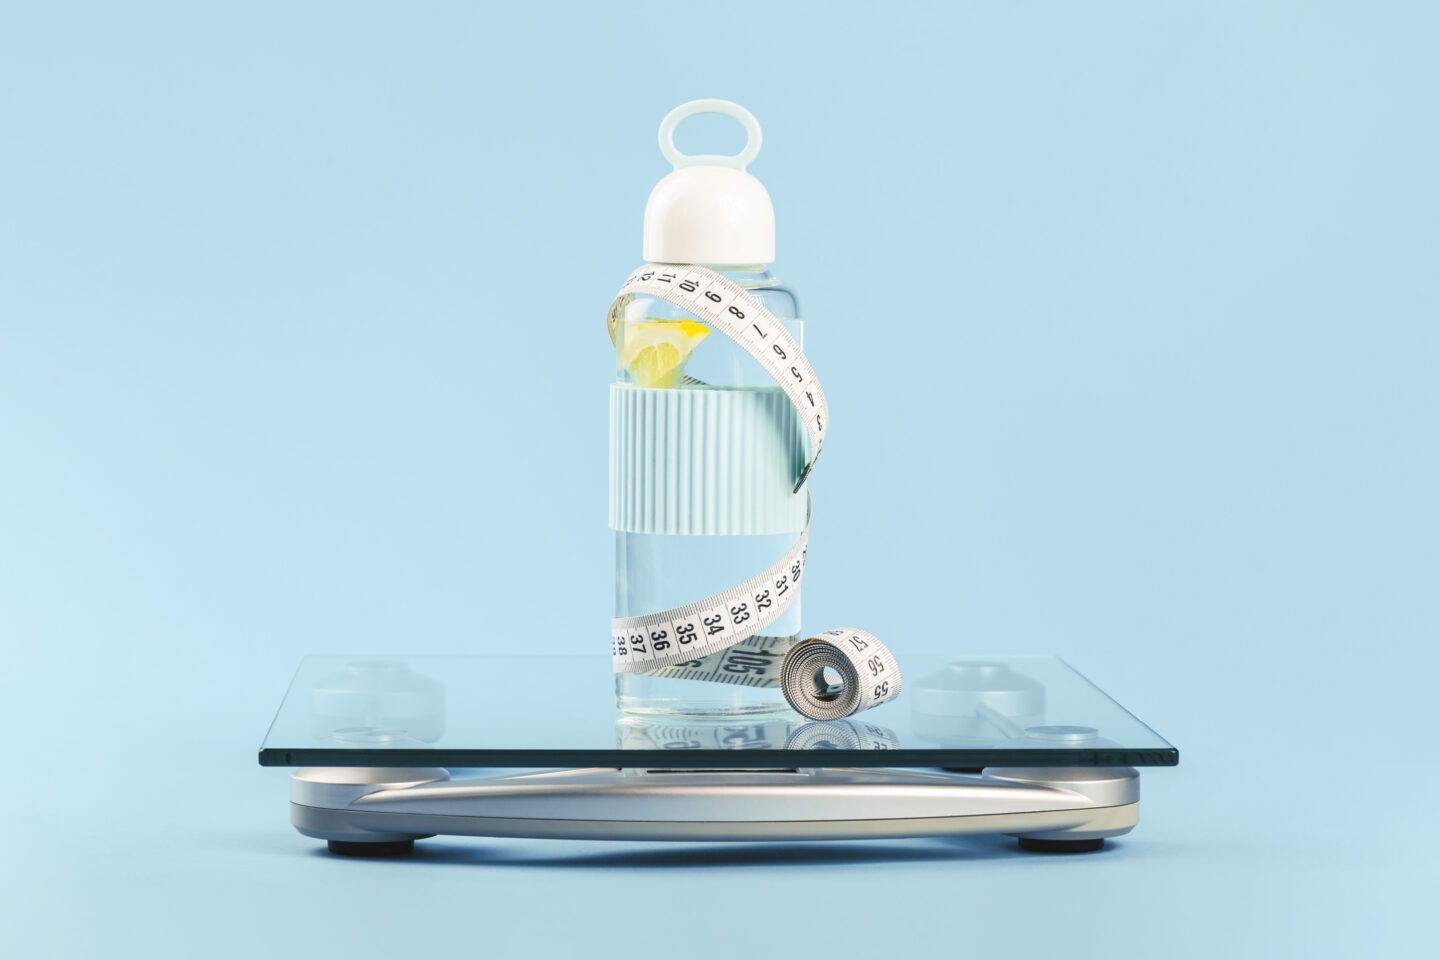 bottle of lemon water on a weighing scale